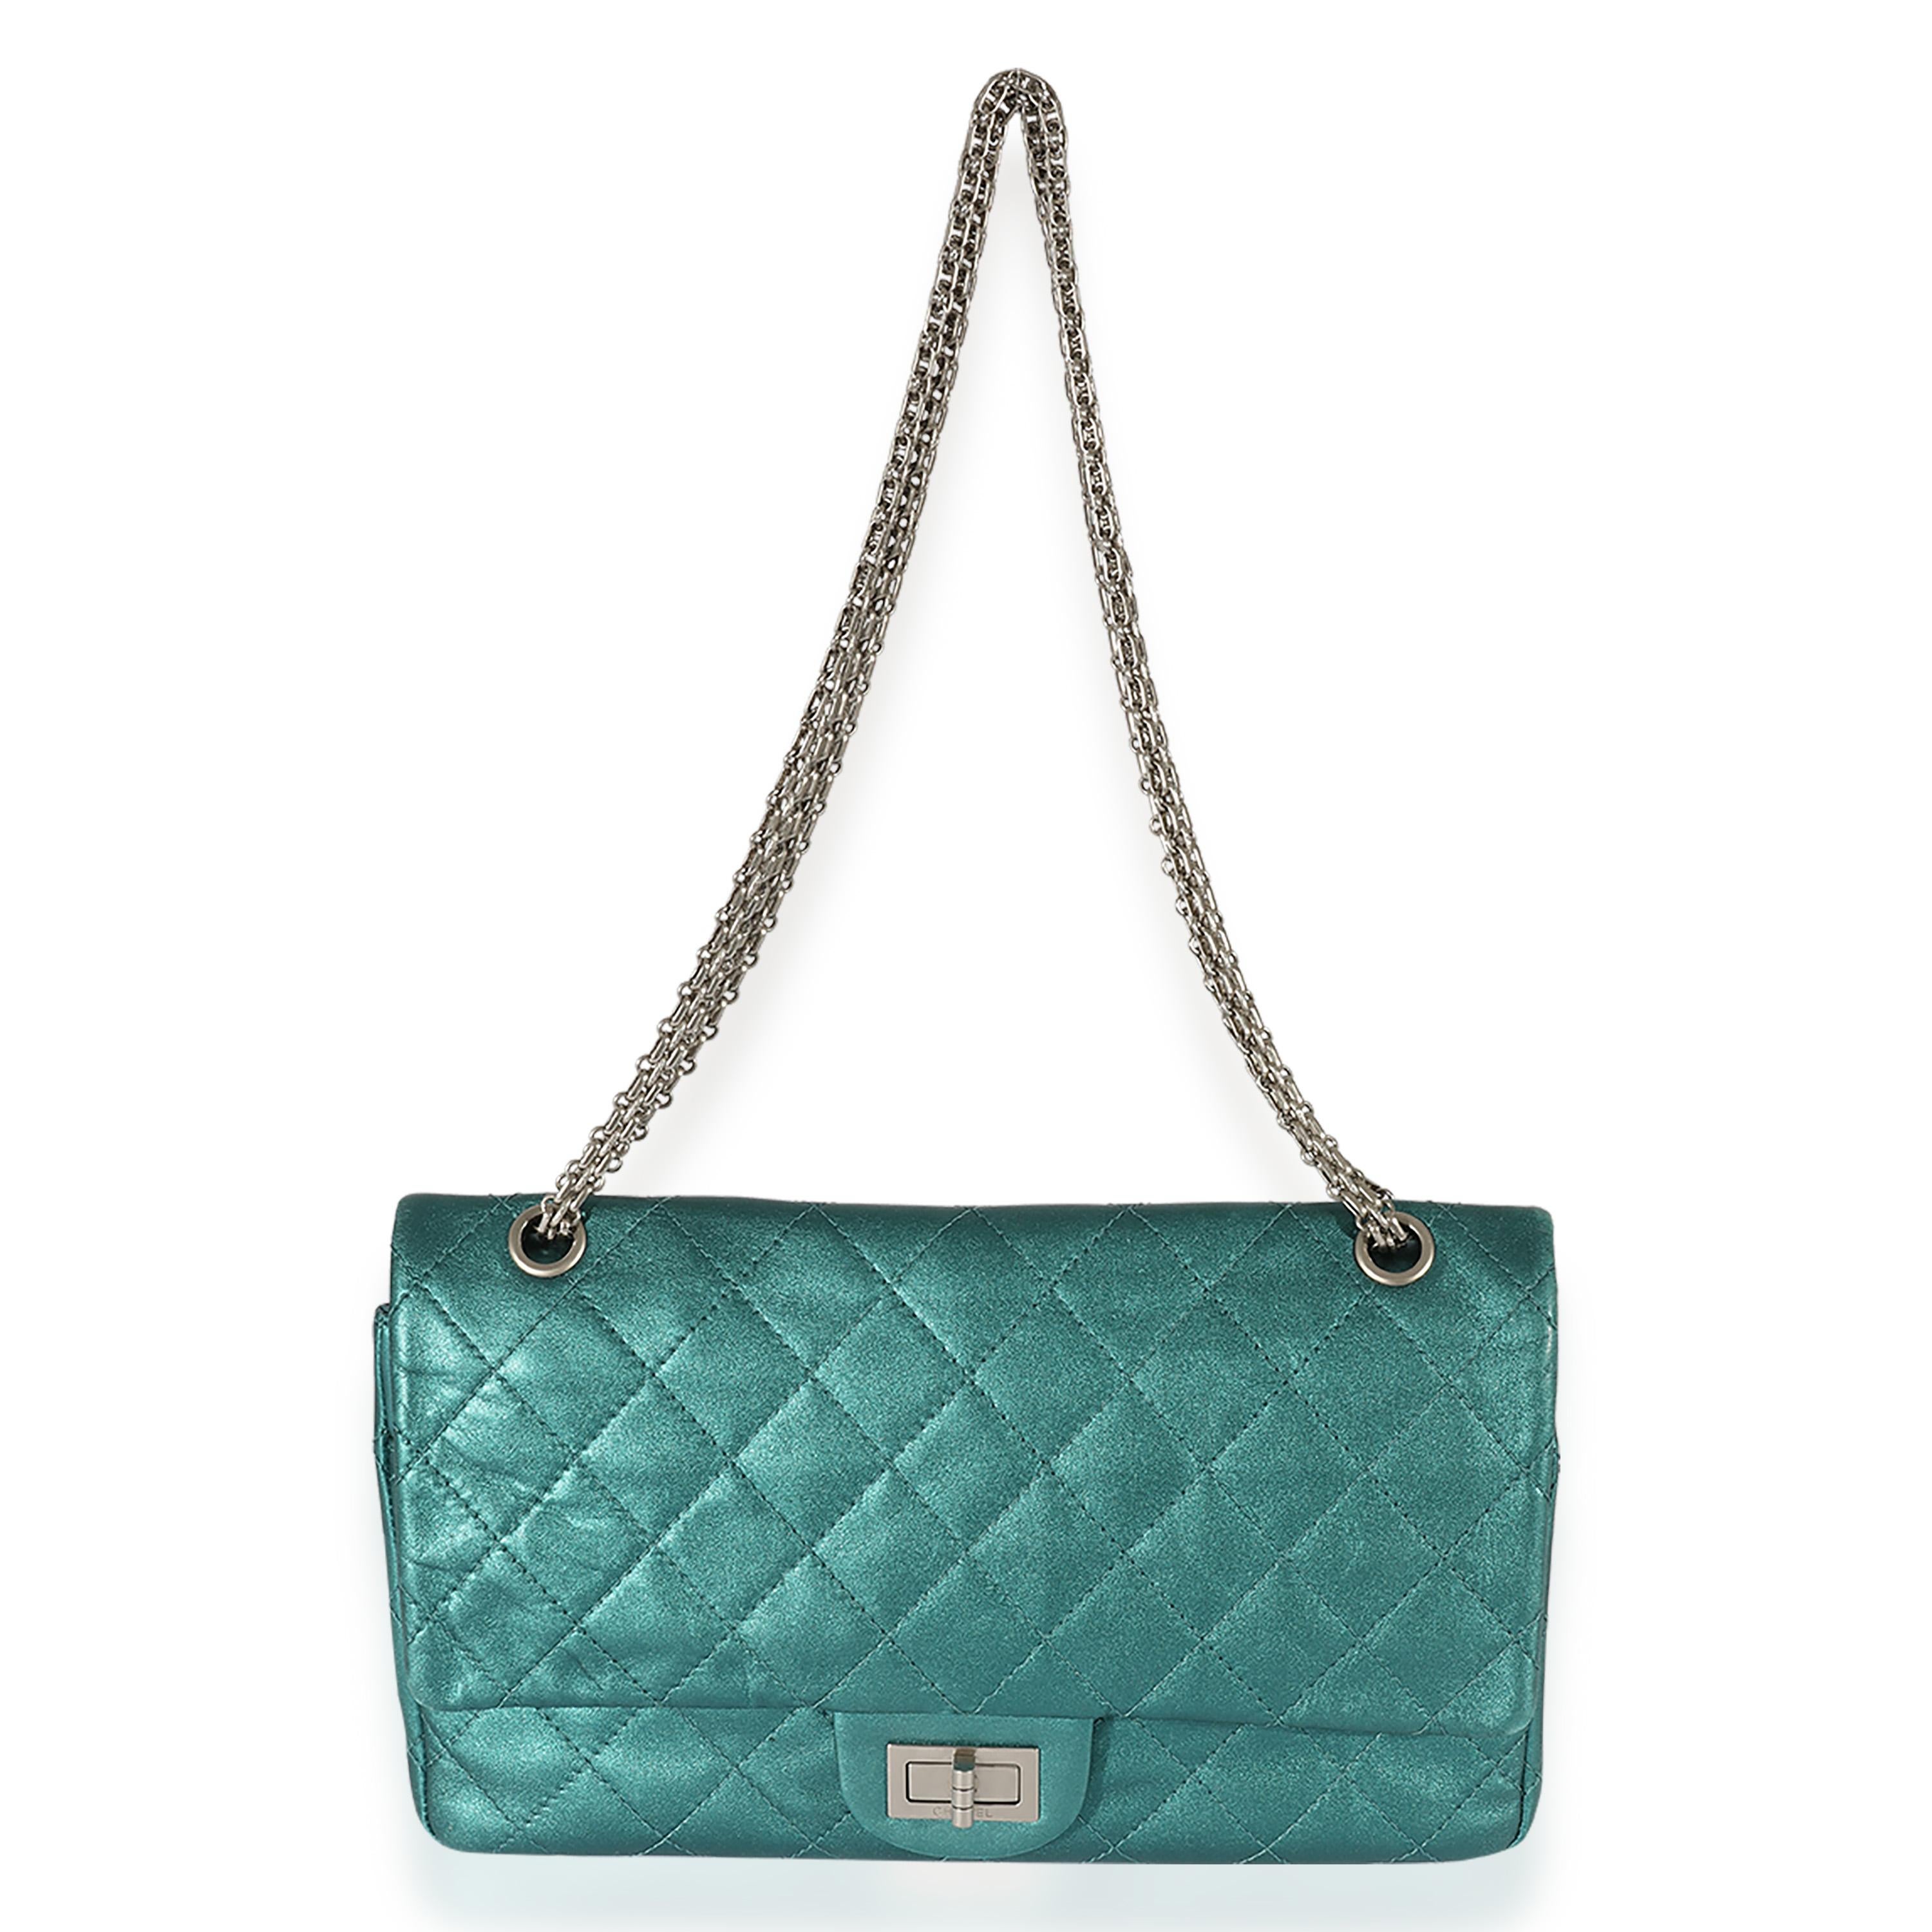 Listing Title: Chanel Green Metallic Leather 2.55 227 Reissue Flap Bag
SKU: 126500
Condition: Pre-owned 
Condition Description: In 2005, Karl Lagerfeld reintroduced the original 2.55 design from Chanel. The quilted flap bag comes in an aged calfskin